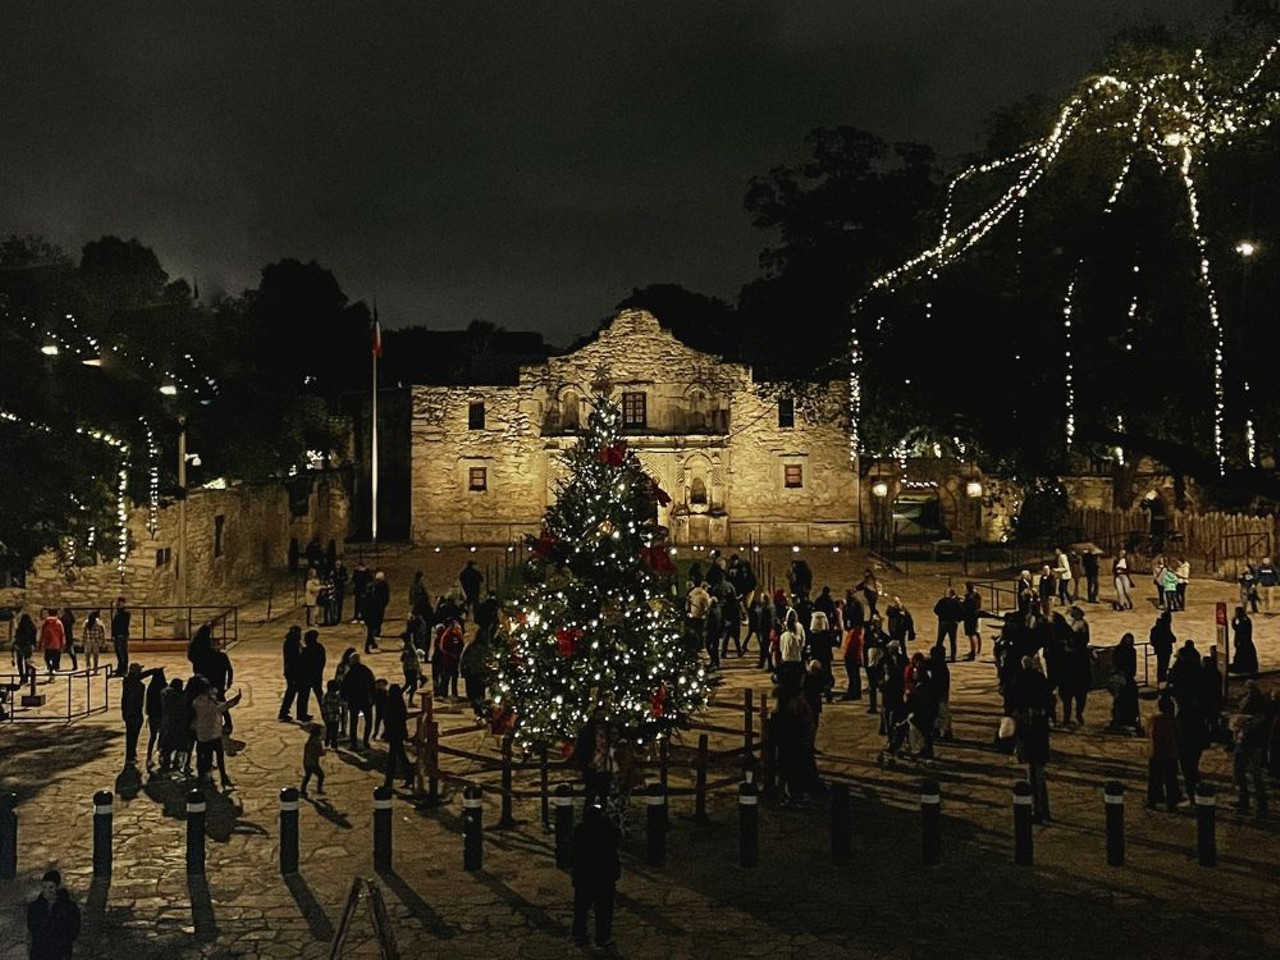 Alamo Lights
300 Alamo Plaza, (210) 225-1391, thealamo.org
From Nov. 24-January 2, 2024, the Alamo will have its halls decked for the holiday season, giving San Antonio's famous landmark an extra dose of festive cheer. The live oak, pecan and other trees on the Alamo grounds will be illuminated with twinkling lights, and historical light installations of the Alamo Defenders will also be up for viewing.